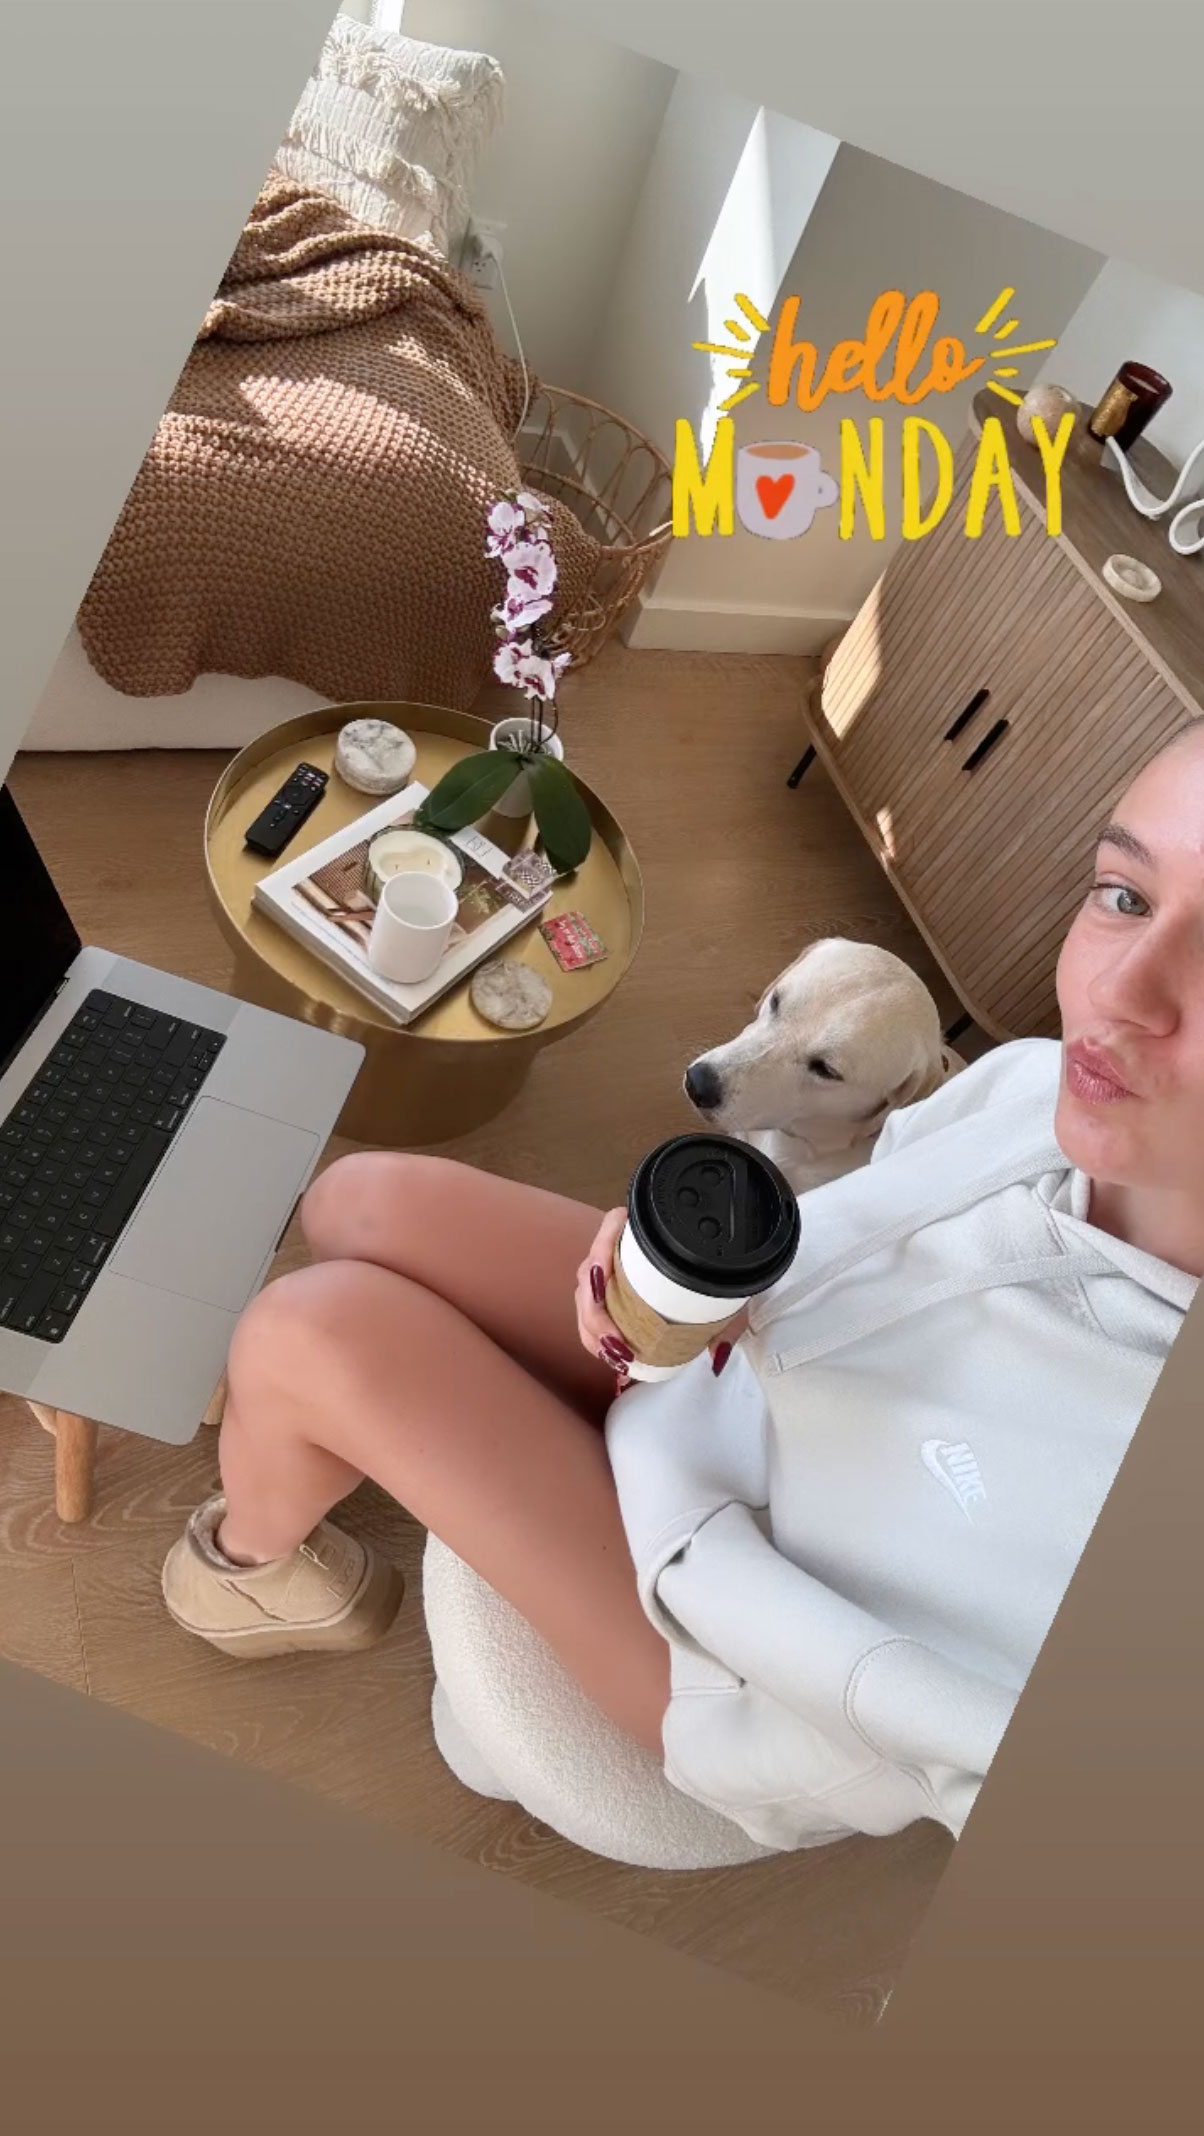 Aubrey shared a follow-up selfie with her dog just days after it was revealed she and the American Idol host split after three years together